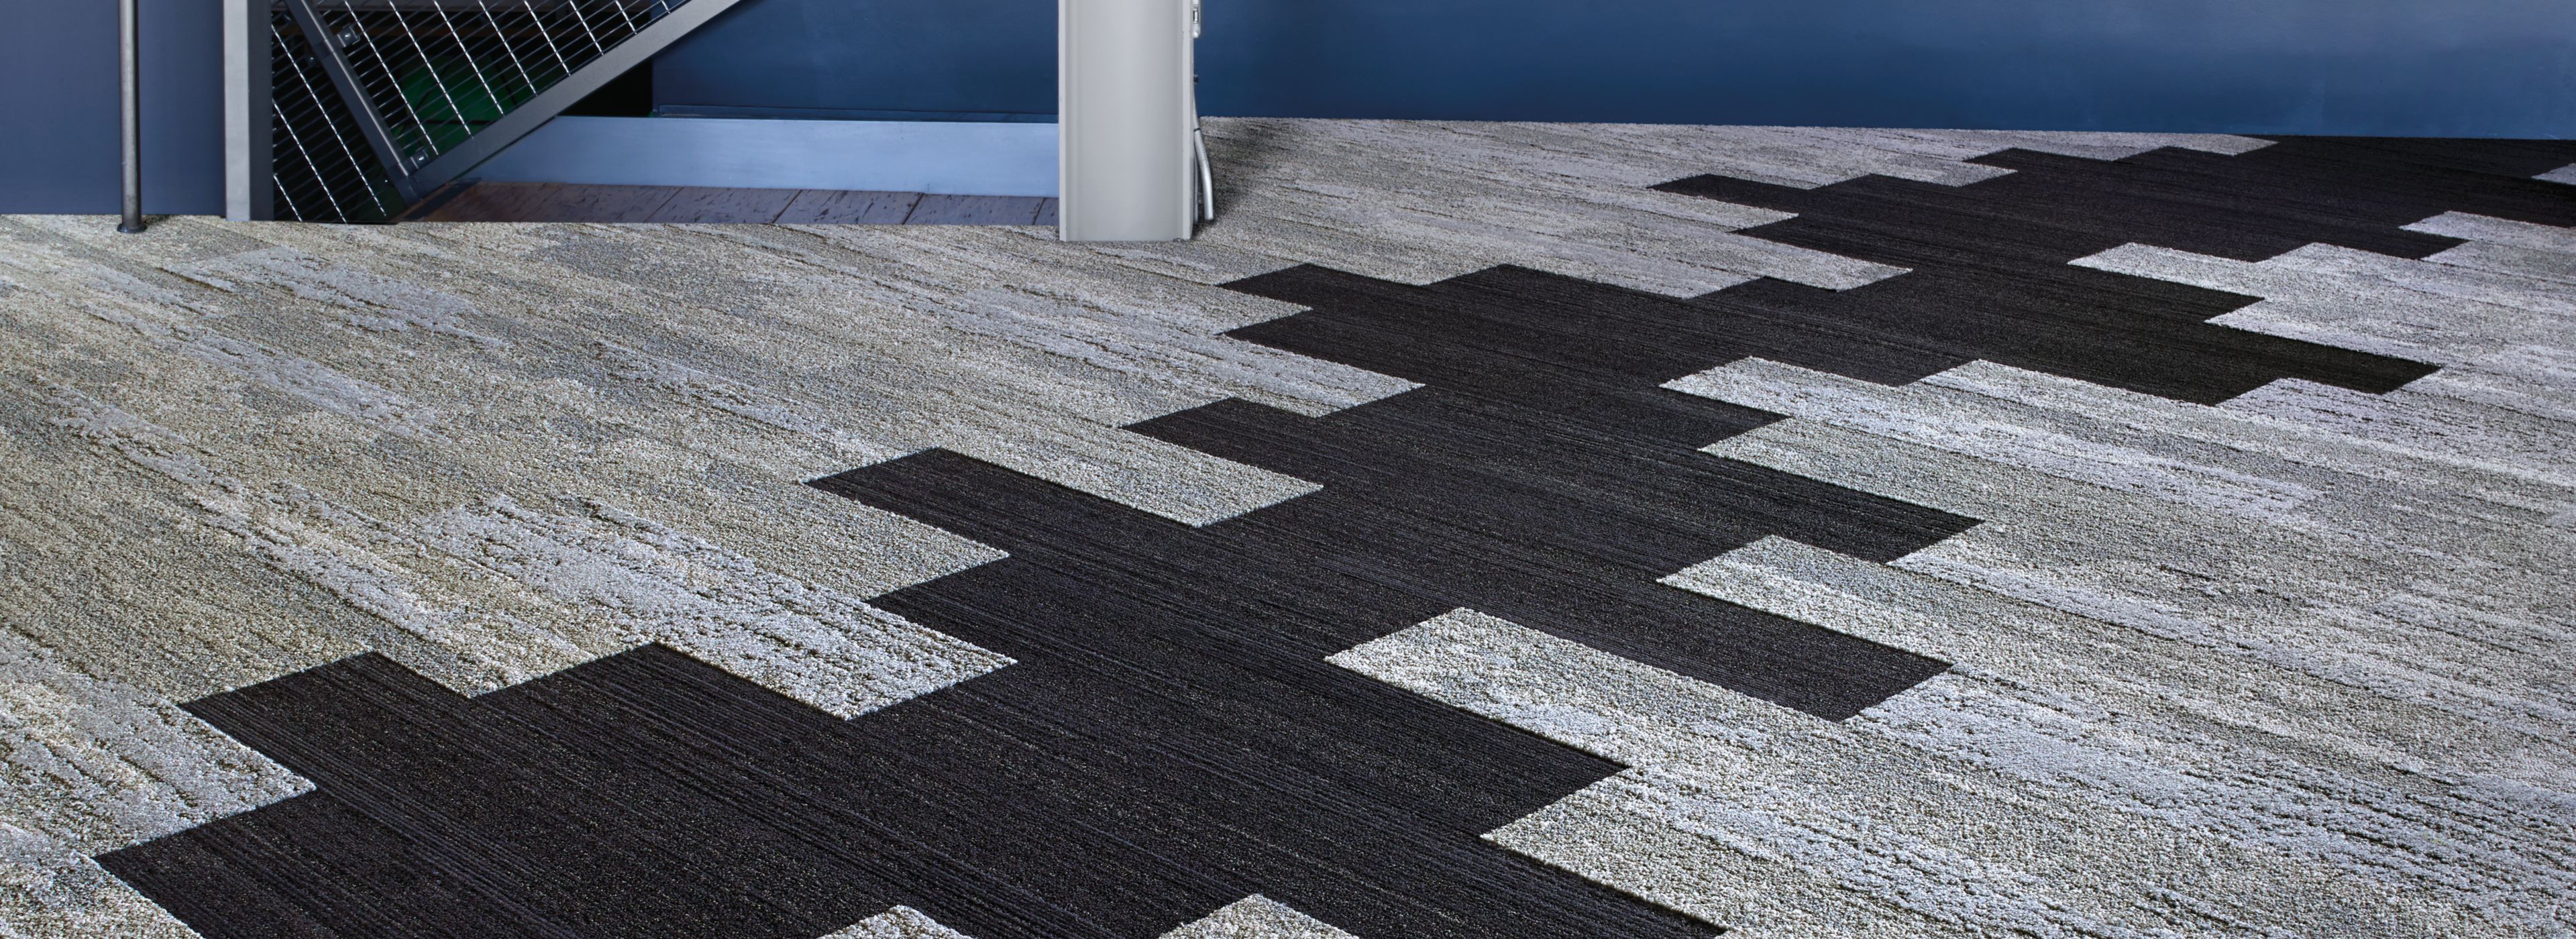 Interface NF400 and NF401 plank carpet tile in a corridor or entryway of a public space Bildnummer 1